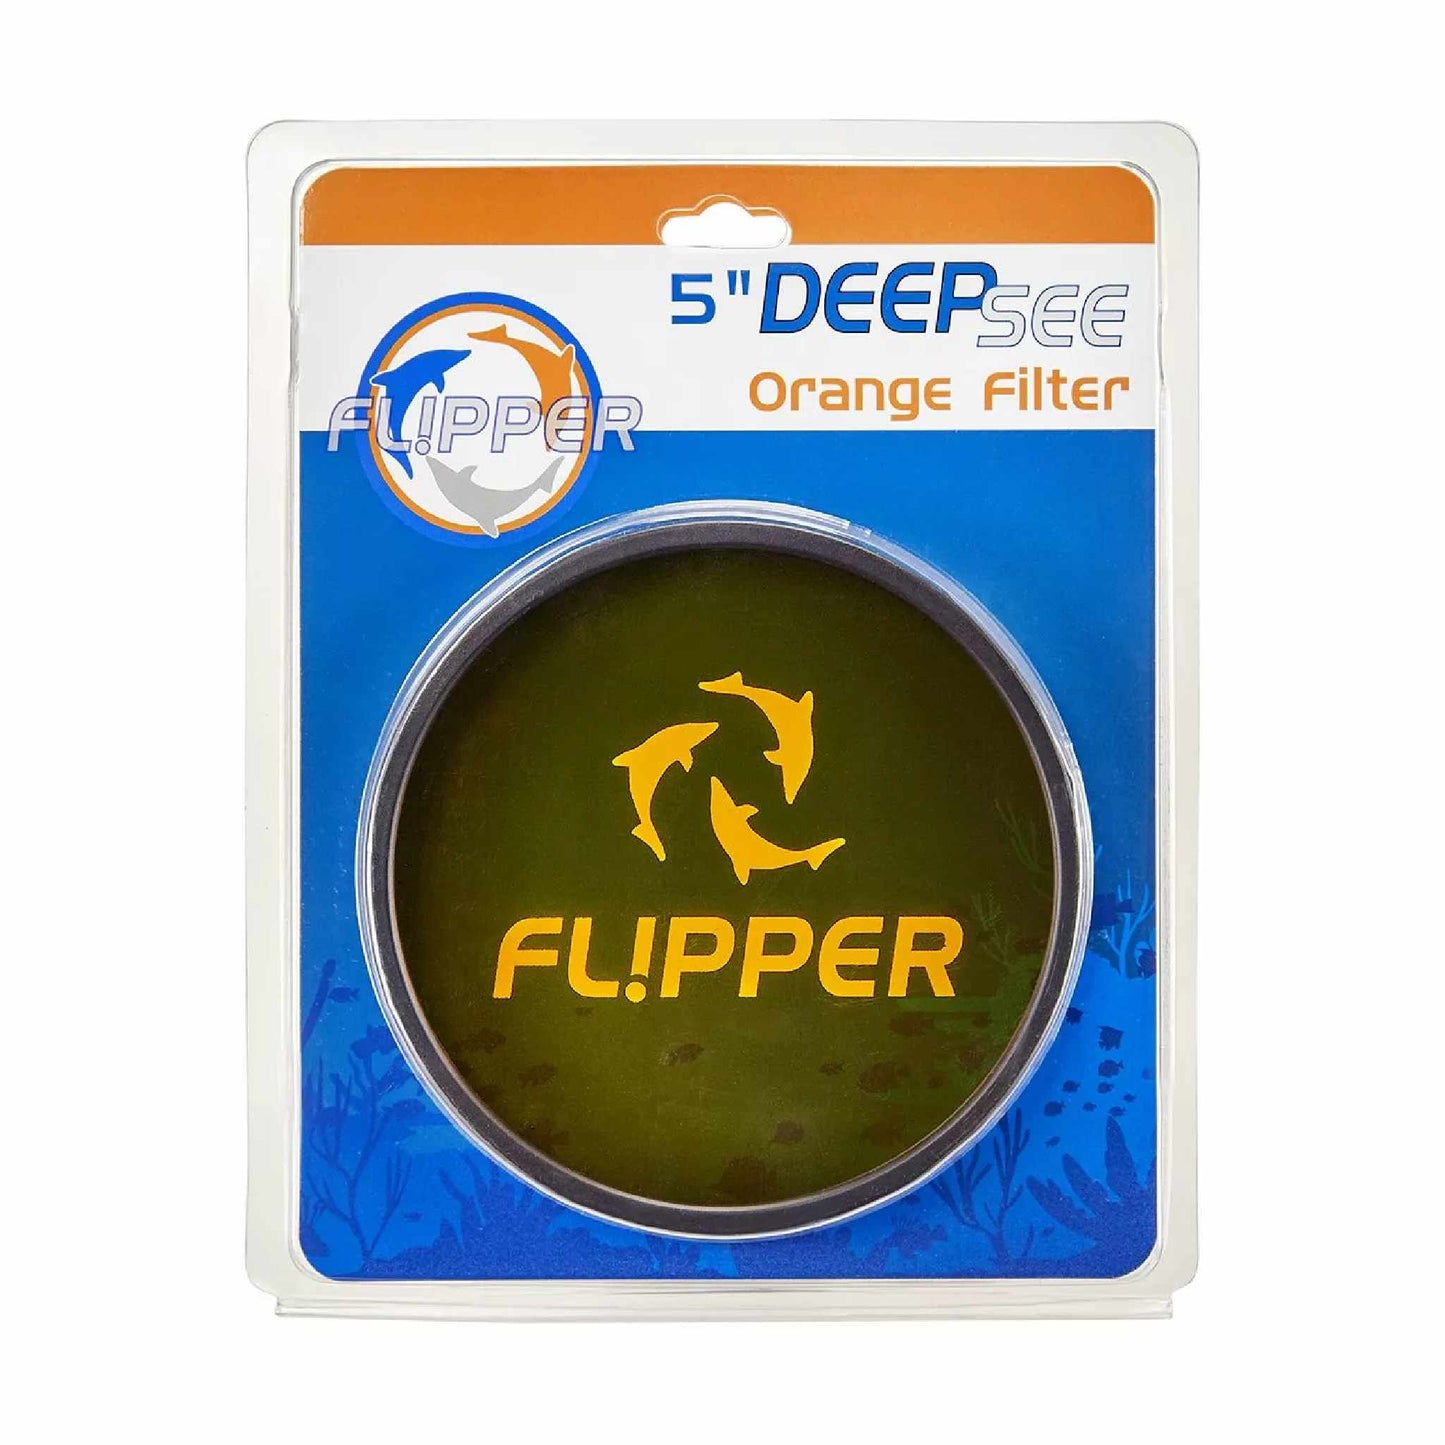 5" Orange Filter Lens for DeepSee MAX Magnified Magnetic Viewer - Flipper